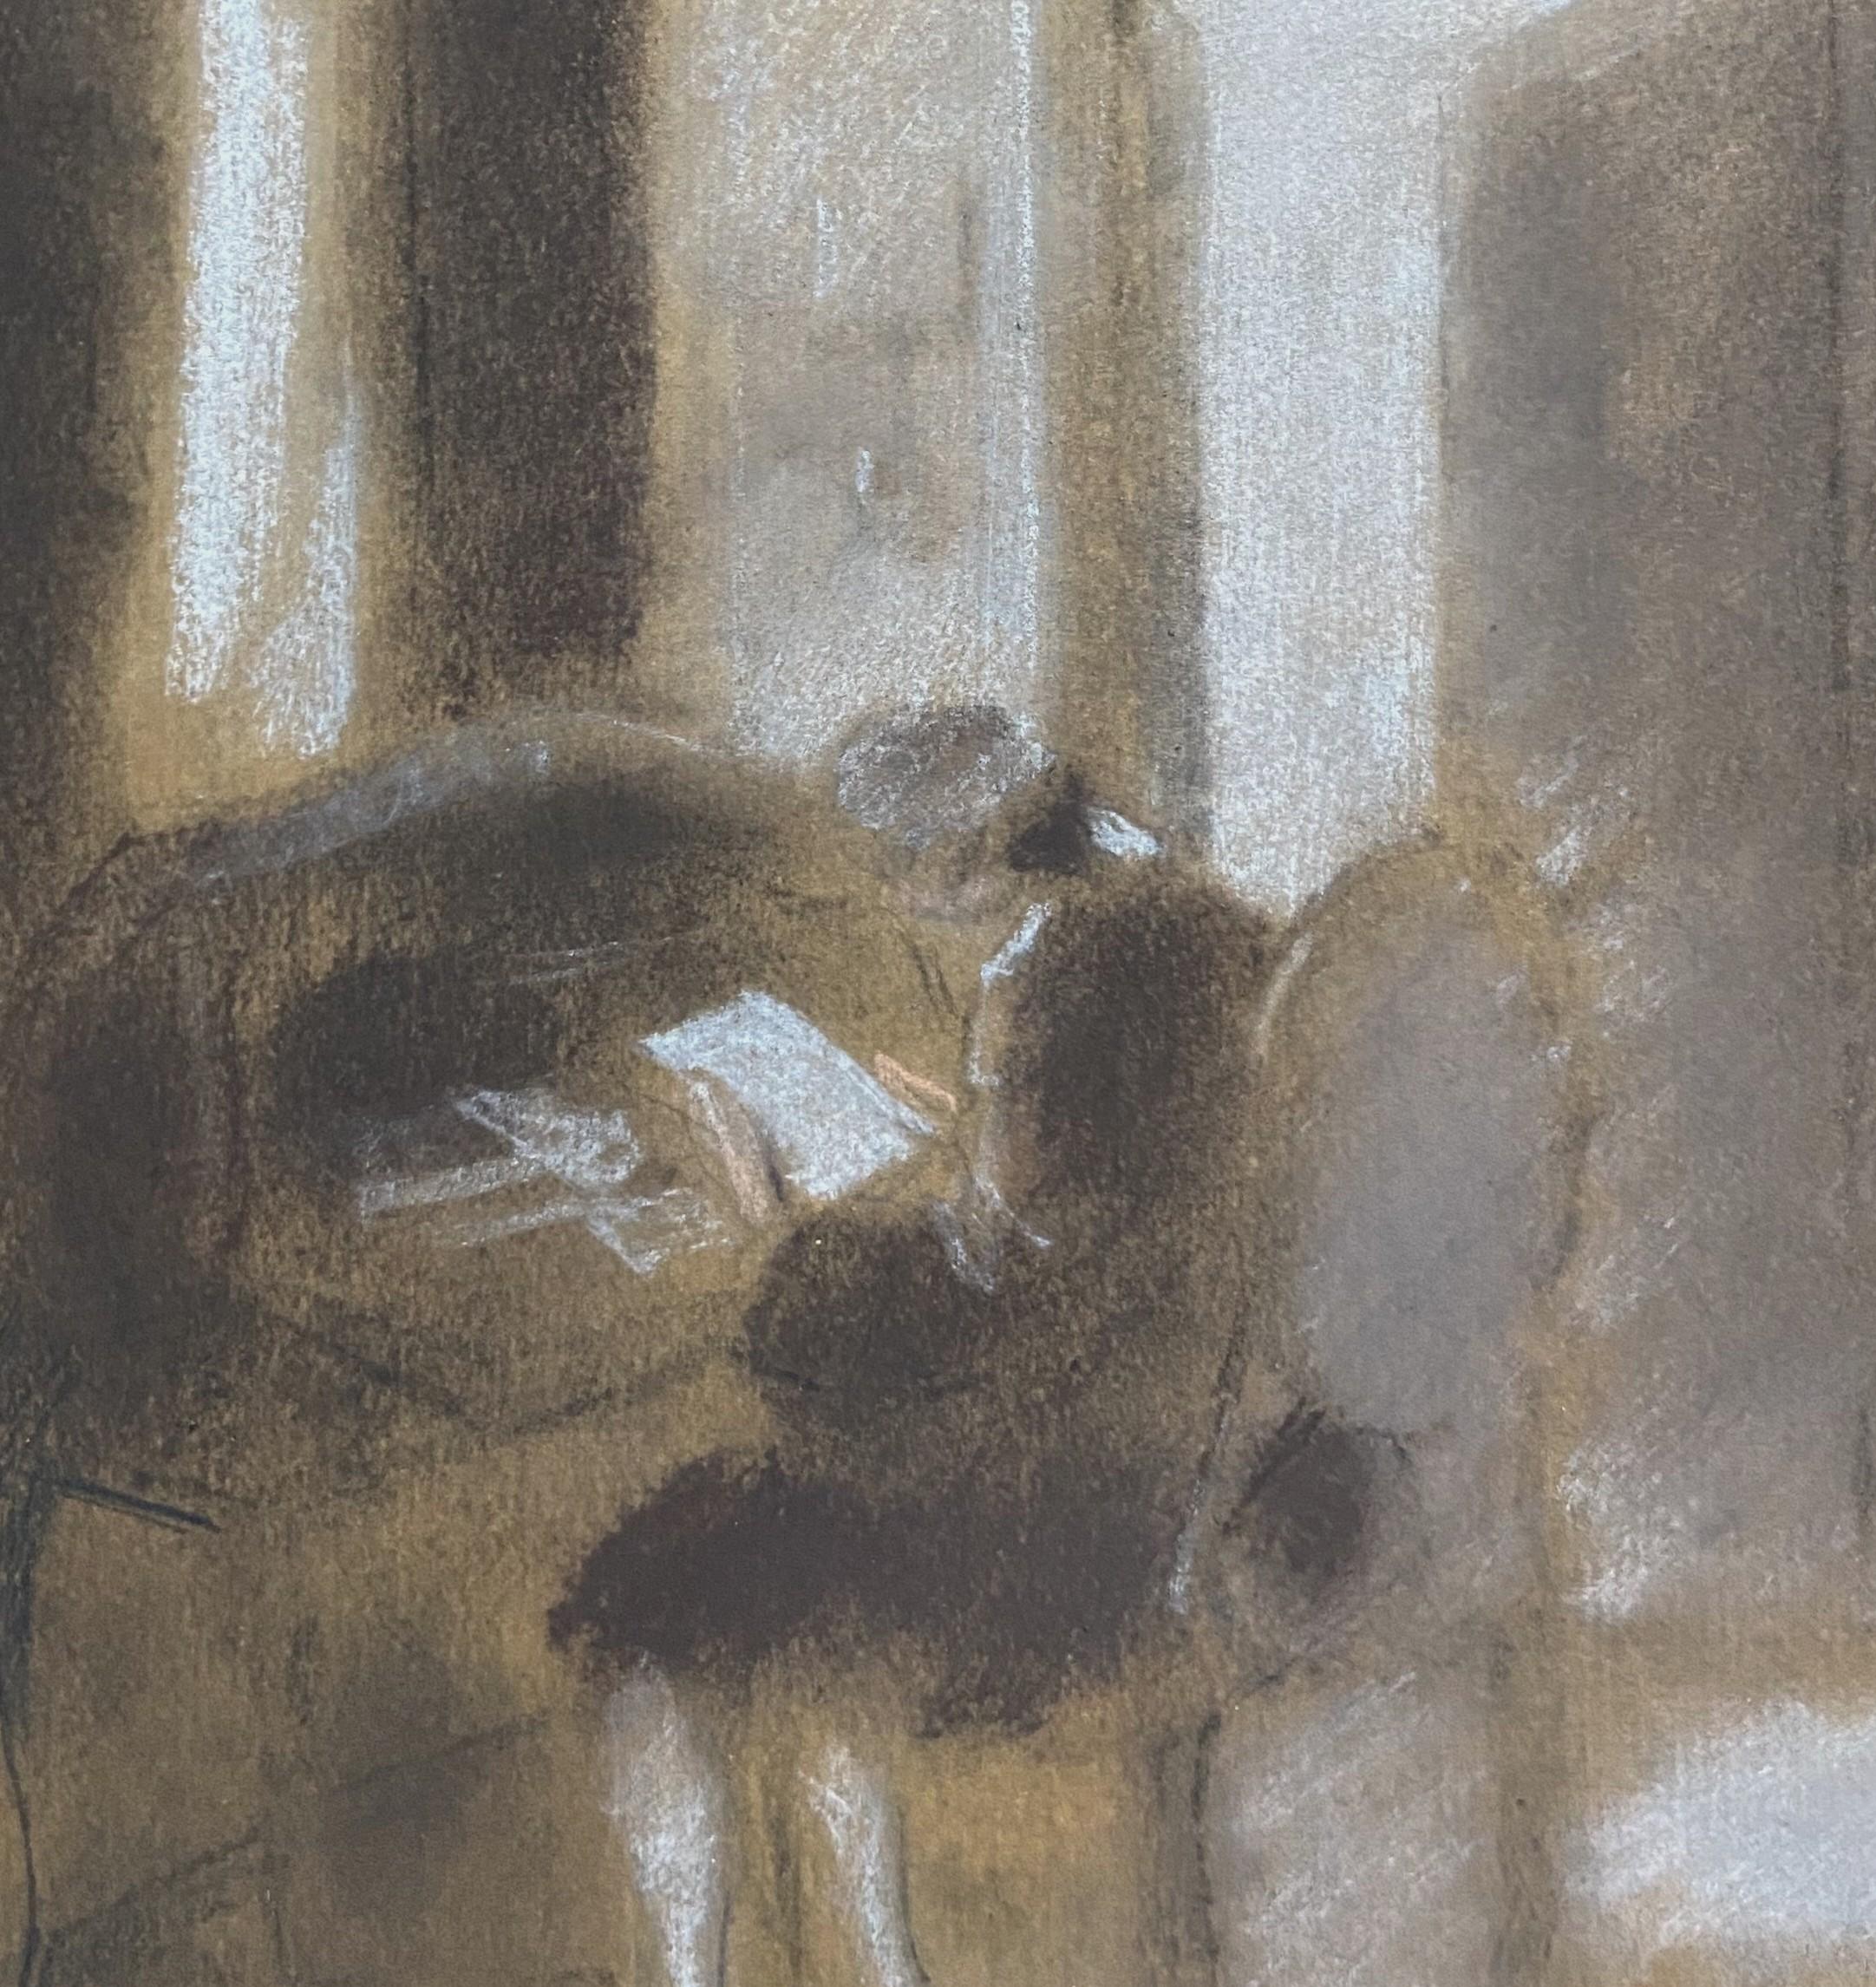 Lucien-Victor Guirand de Scevola (1871-1950)
A Man writing at his desk, 18th century interior scene
Pastel on paper
Signed upper right  
20.5 x 15.8 cm 
Framed under glass  : 37 x 31.5 cm

It is known that Guirand de Scevola was very interested in